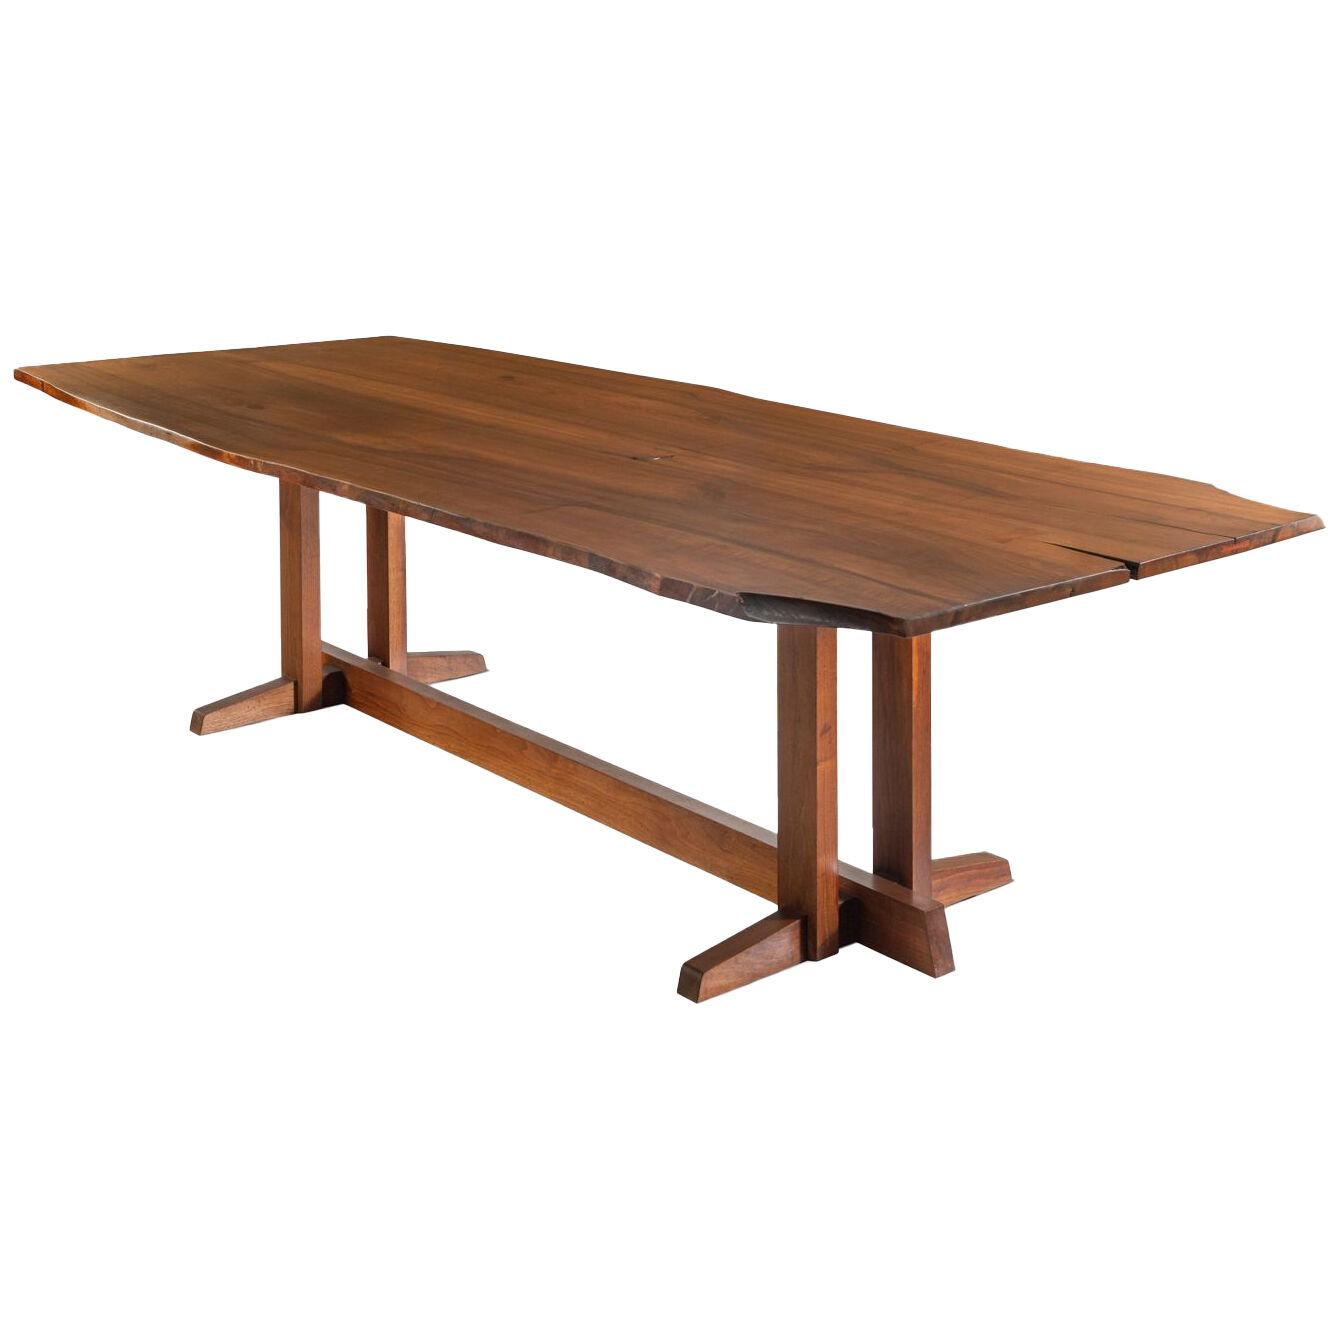 Frenchman's Cove II Dining Table